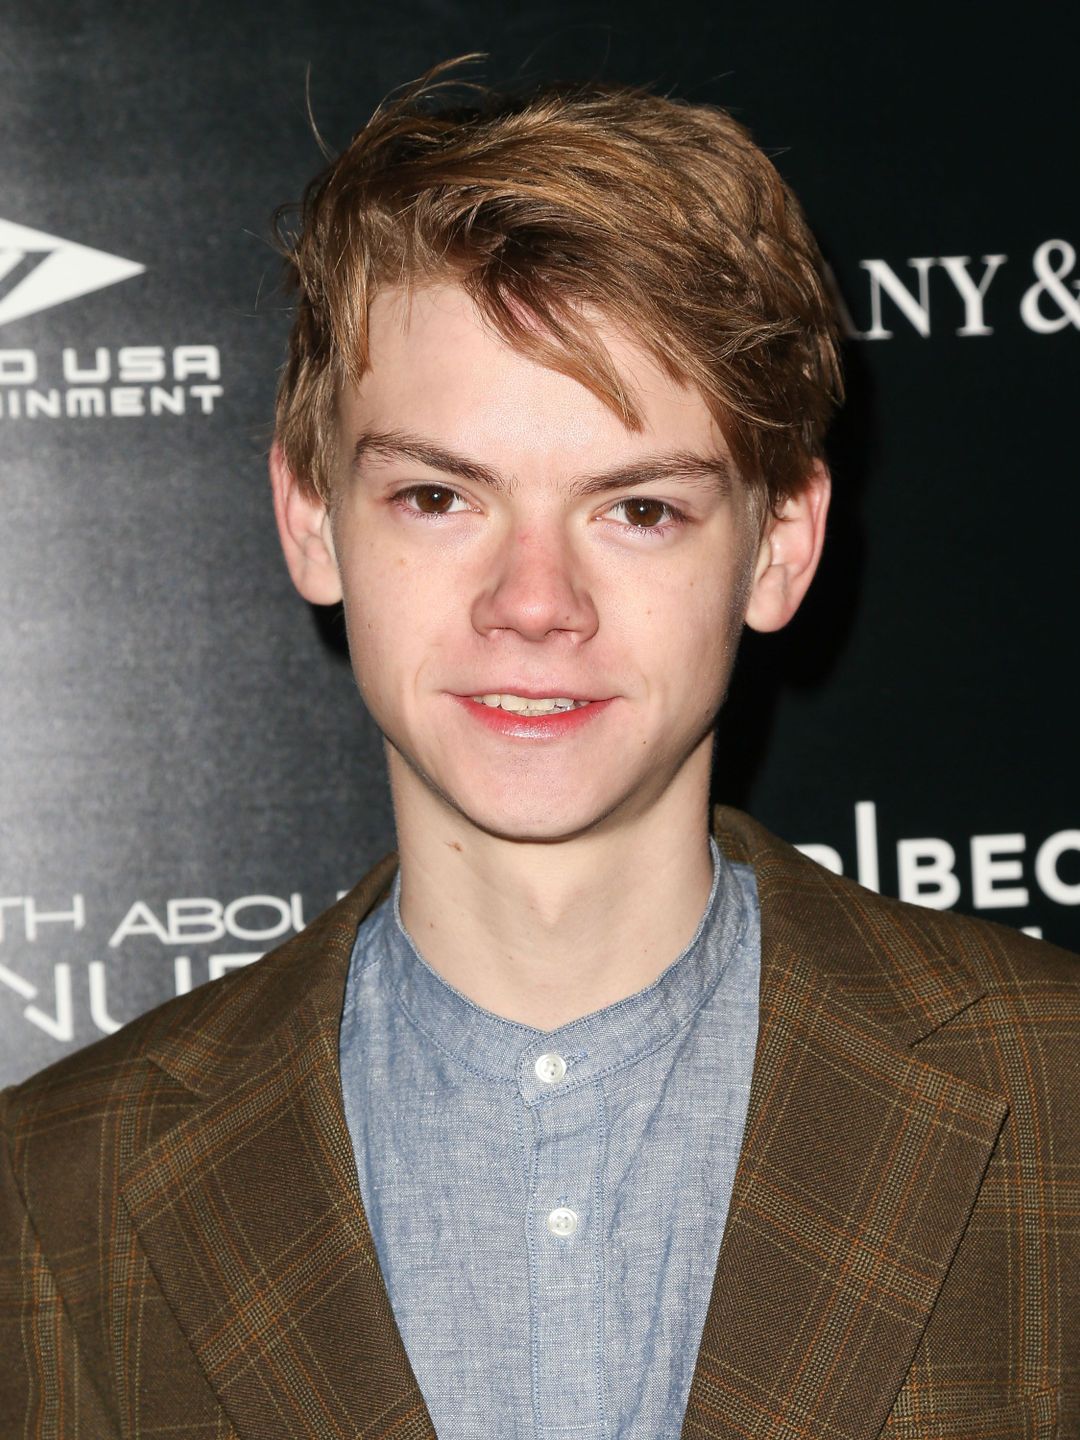 Thomas Sangster where did he study